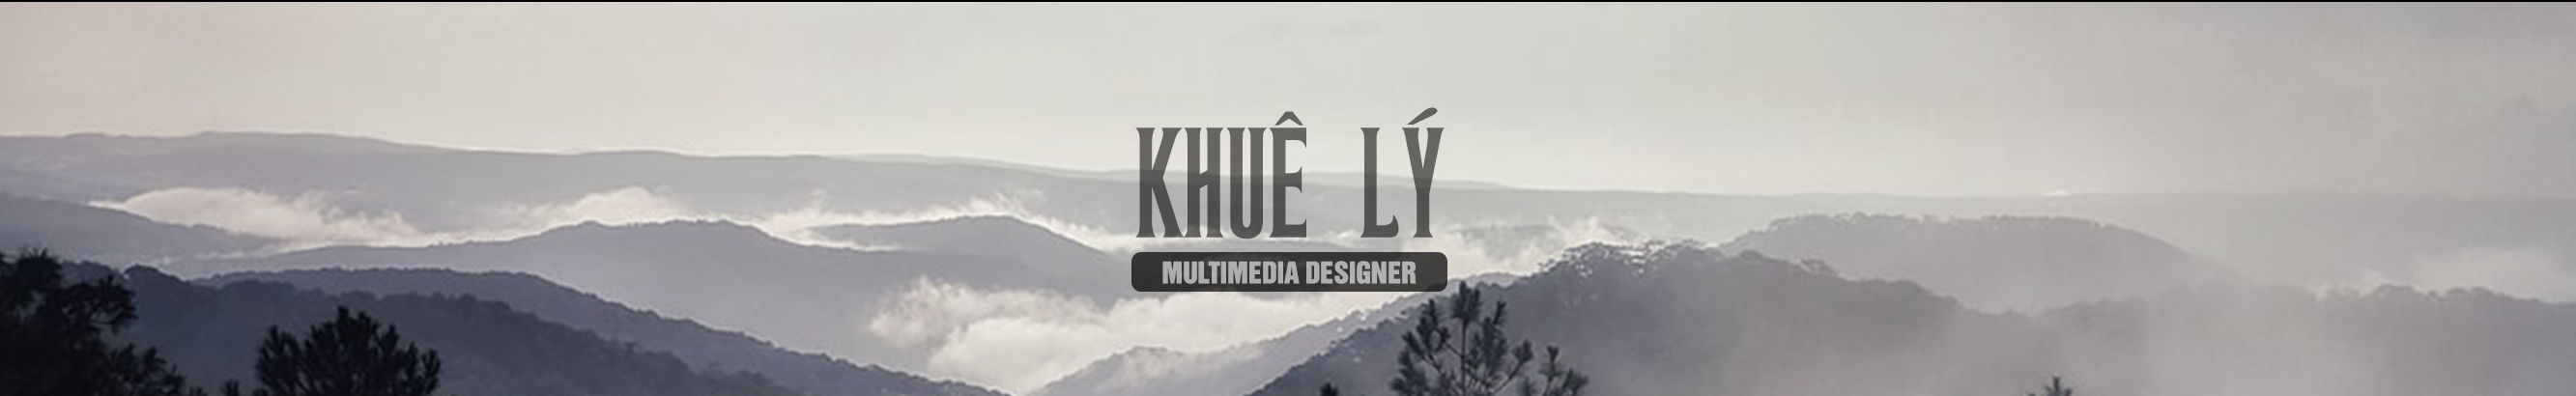 Khue Ly's profile banner